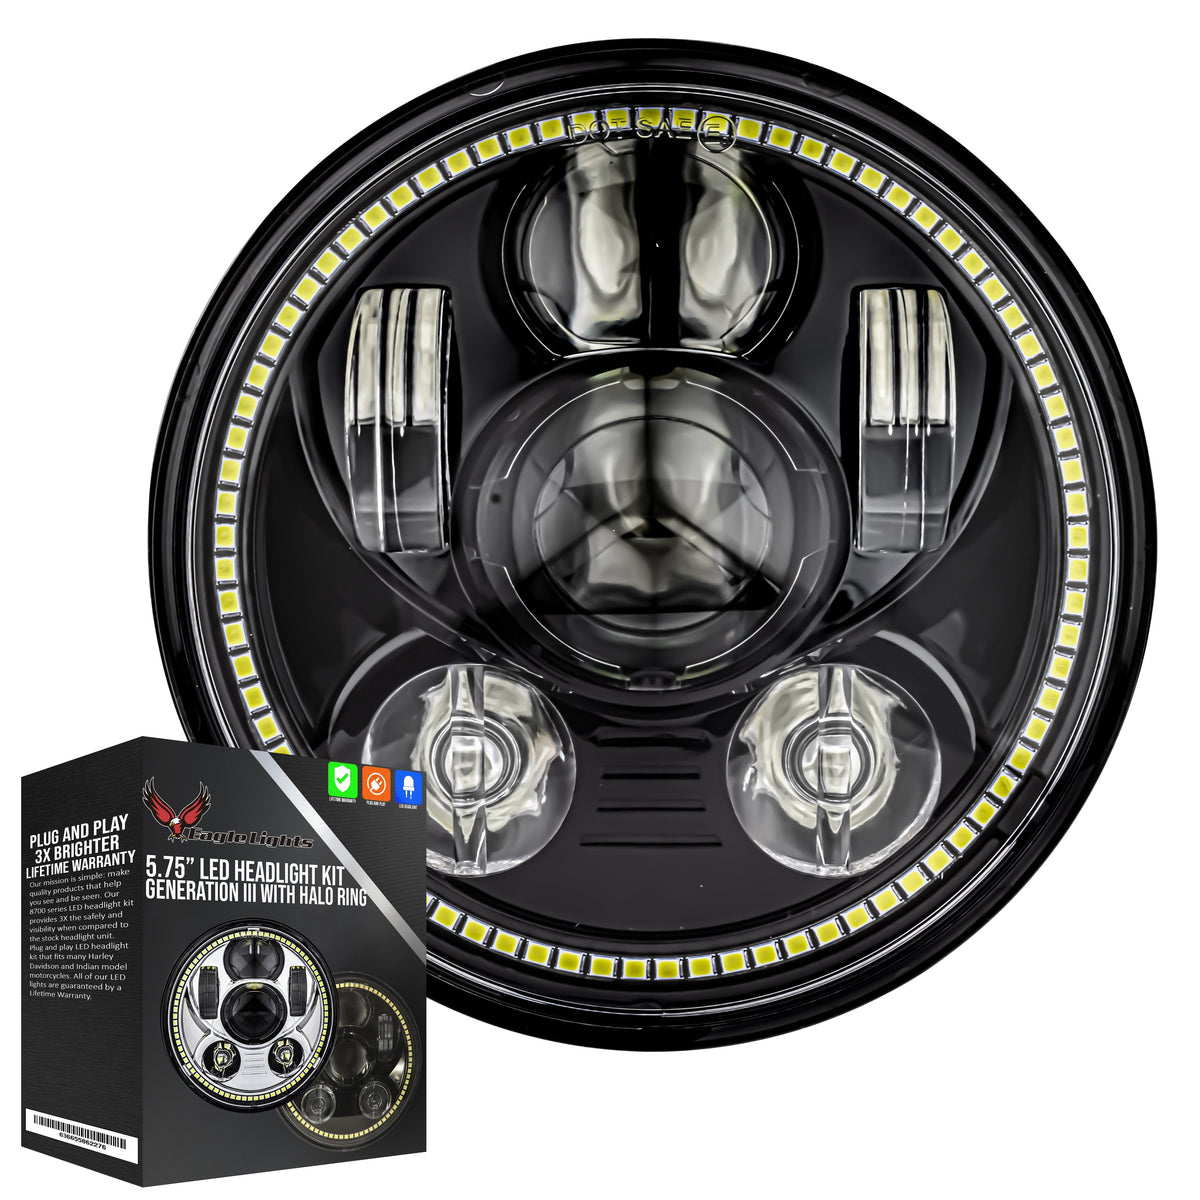 Eagle Lights 5 3/4" LED Headlight Kit with Halo Ring for Harley Davidson and Indian Motorcycles - Generation III / Black